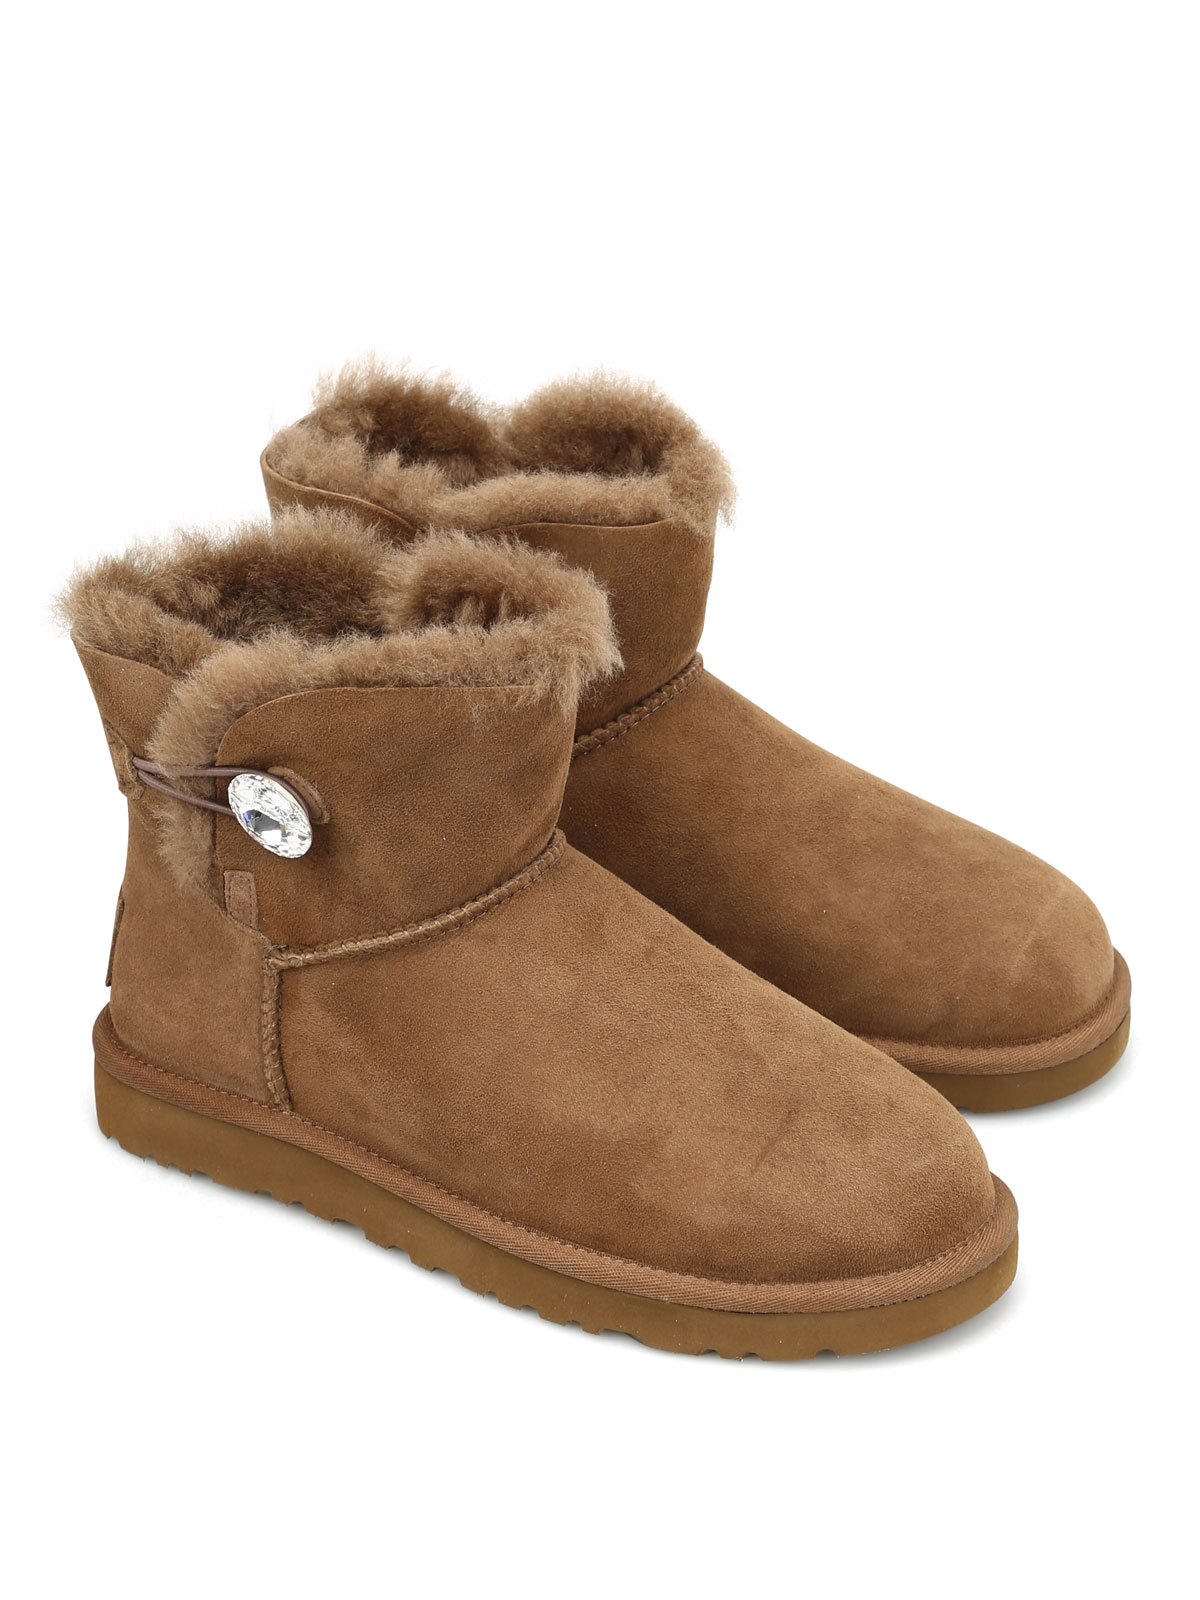 ugg bailey button bling sale